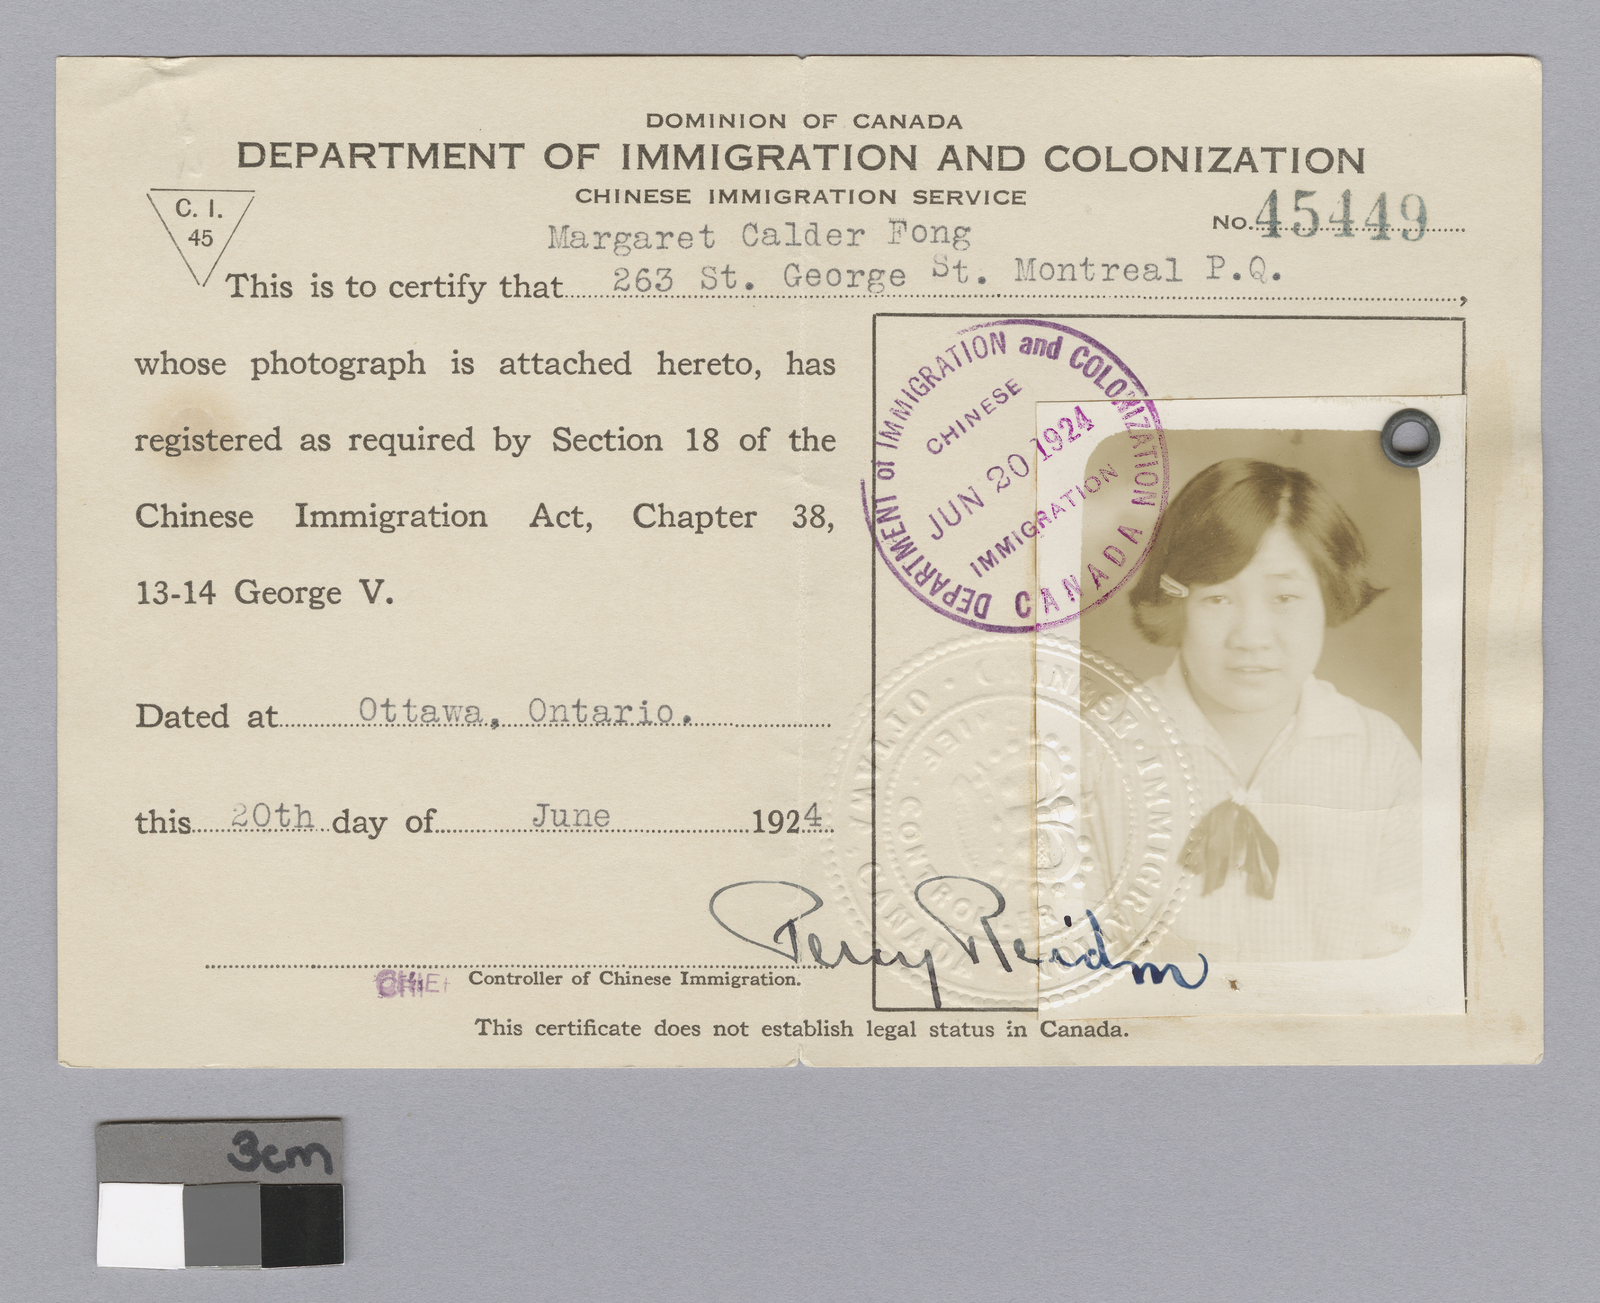 Department of Immigration and Colonization card for Margaret Fong